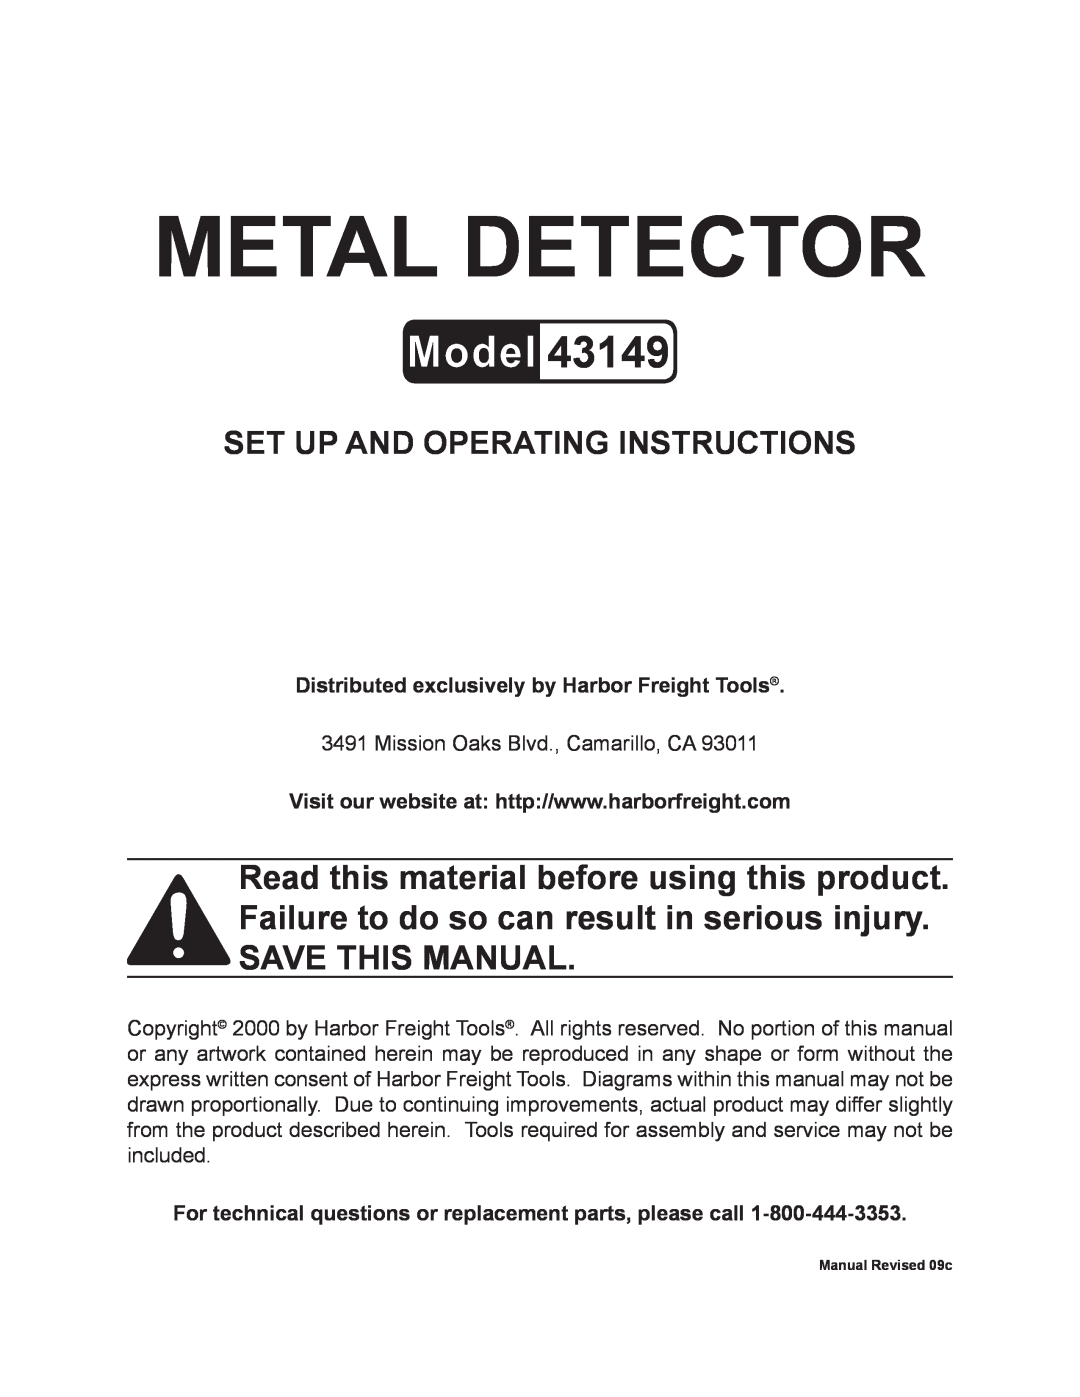 Harbor Freight Tools 43149 operating instructions Distributed exclusively by Harbor Freight Tools, Metal Detector 